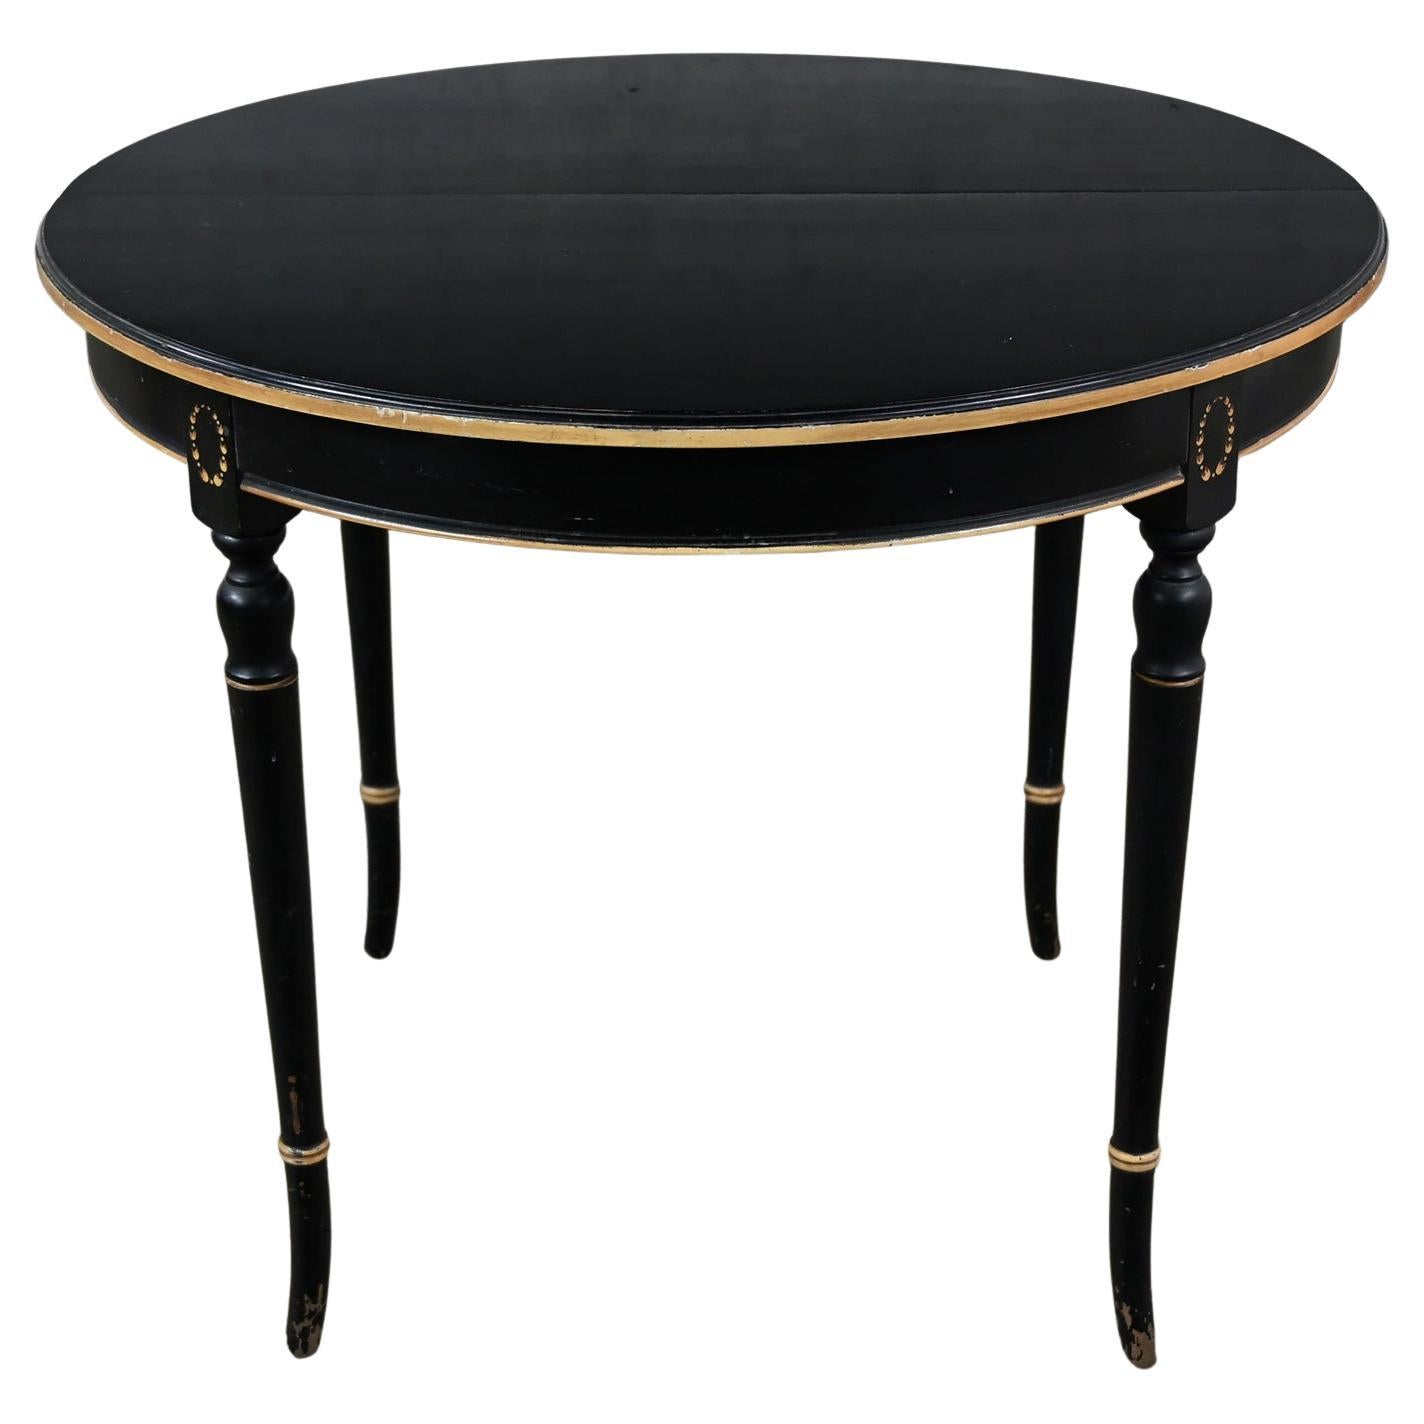 Early 20th Century Neoclassical Round Dining Table Black Age Distressed Finish 